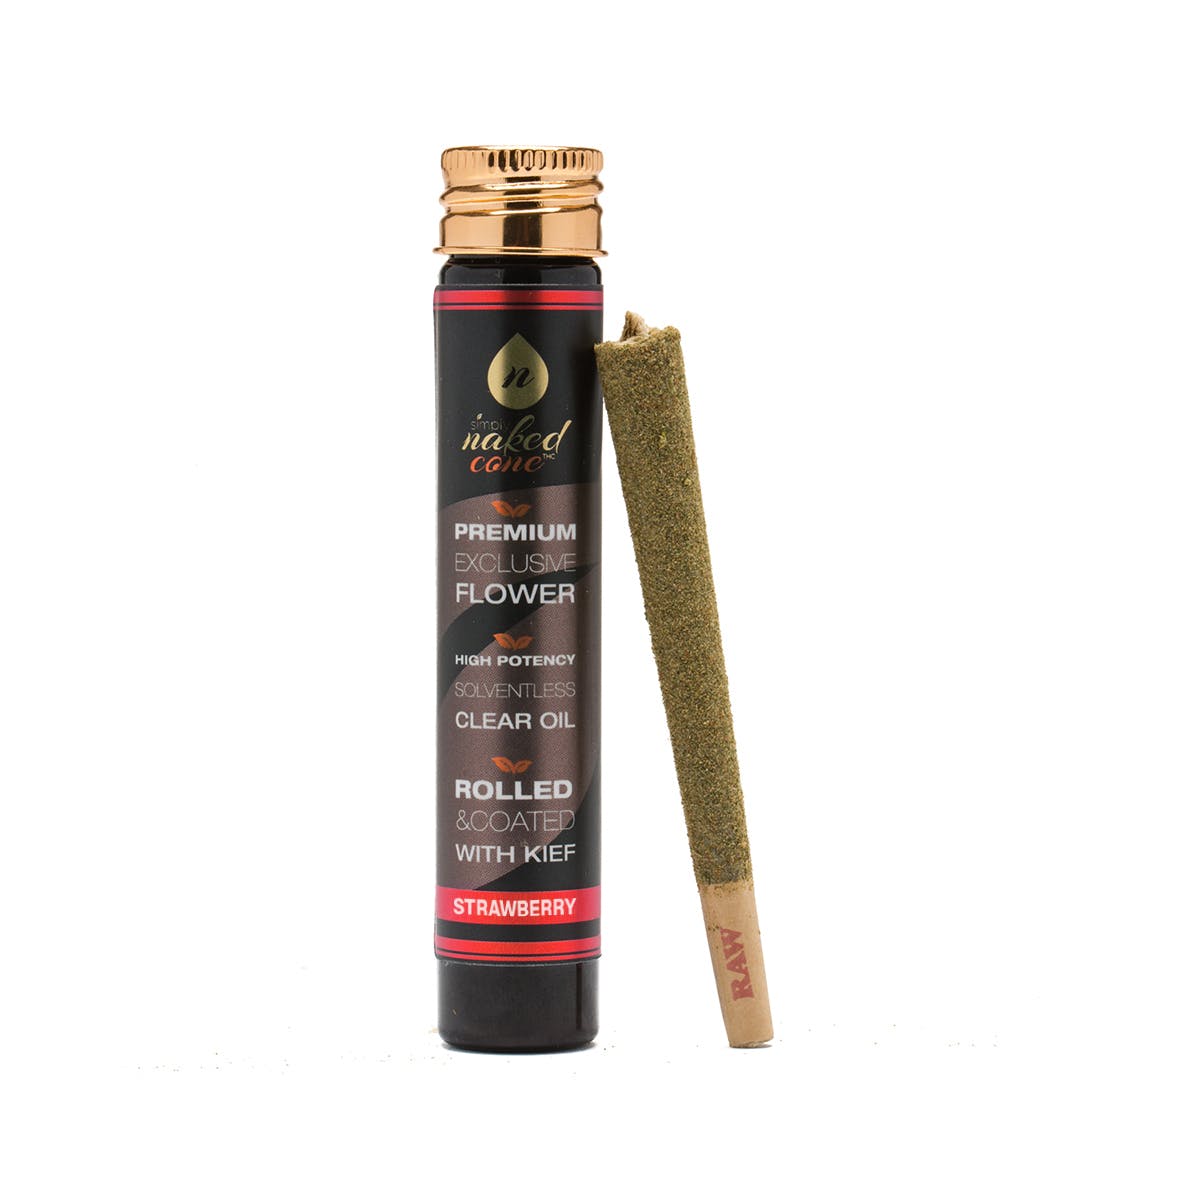 marijuana-dispensaries-og-central-20-cap-in-los-angeles-strawberry-simply-naked-cone